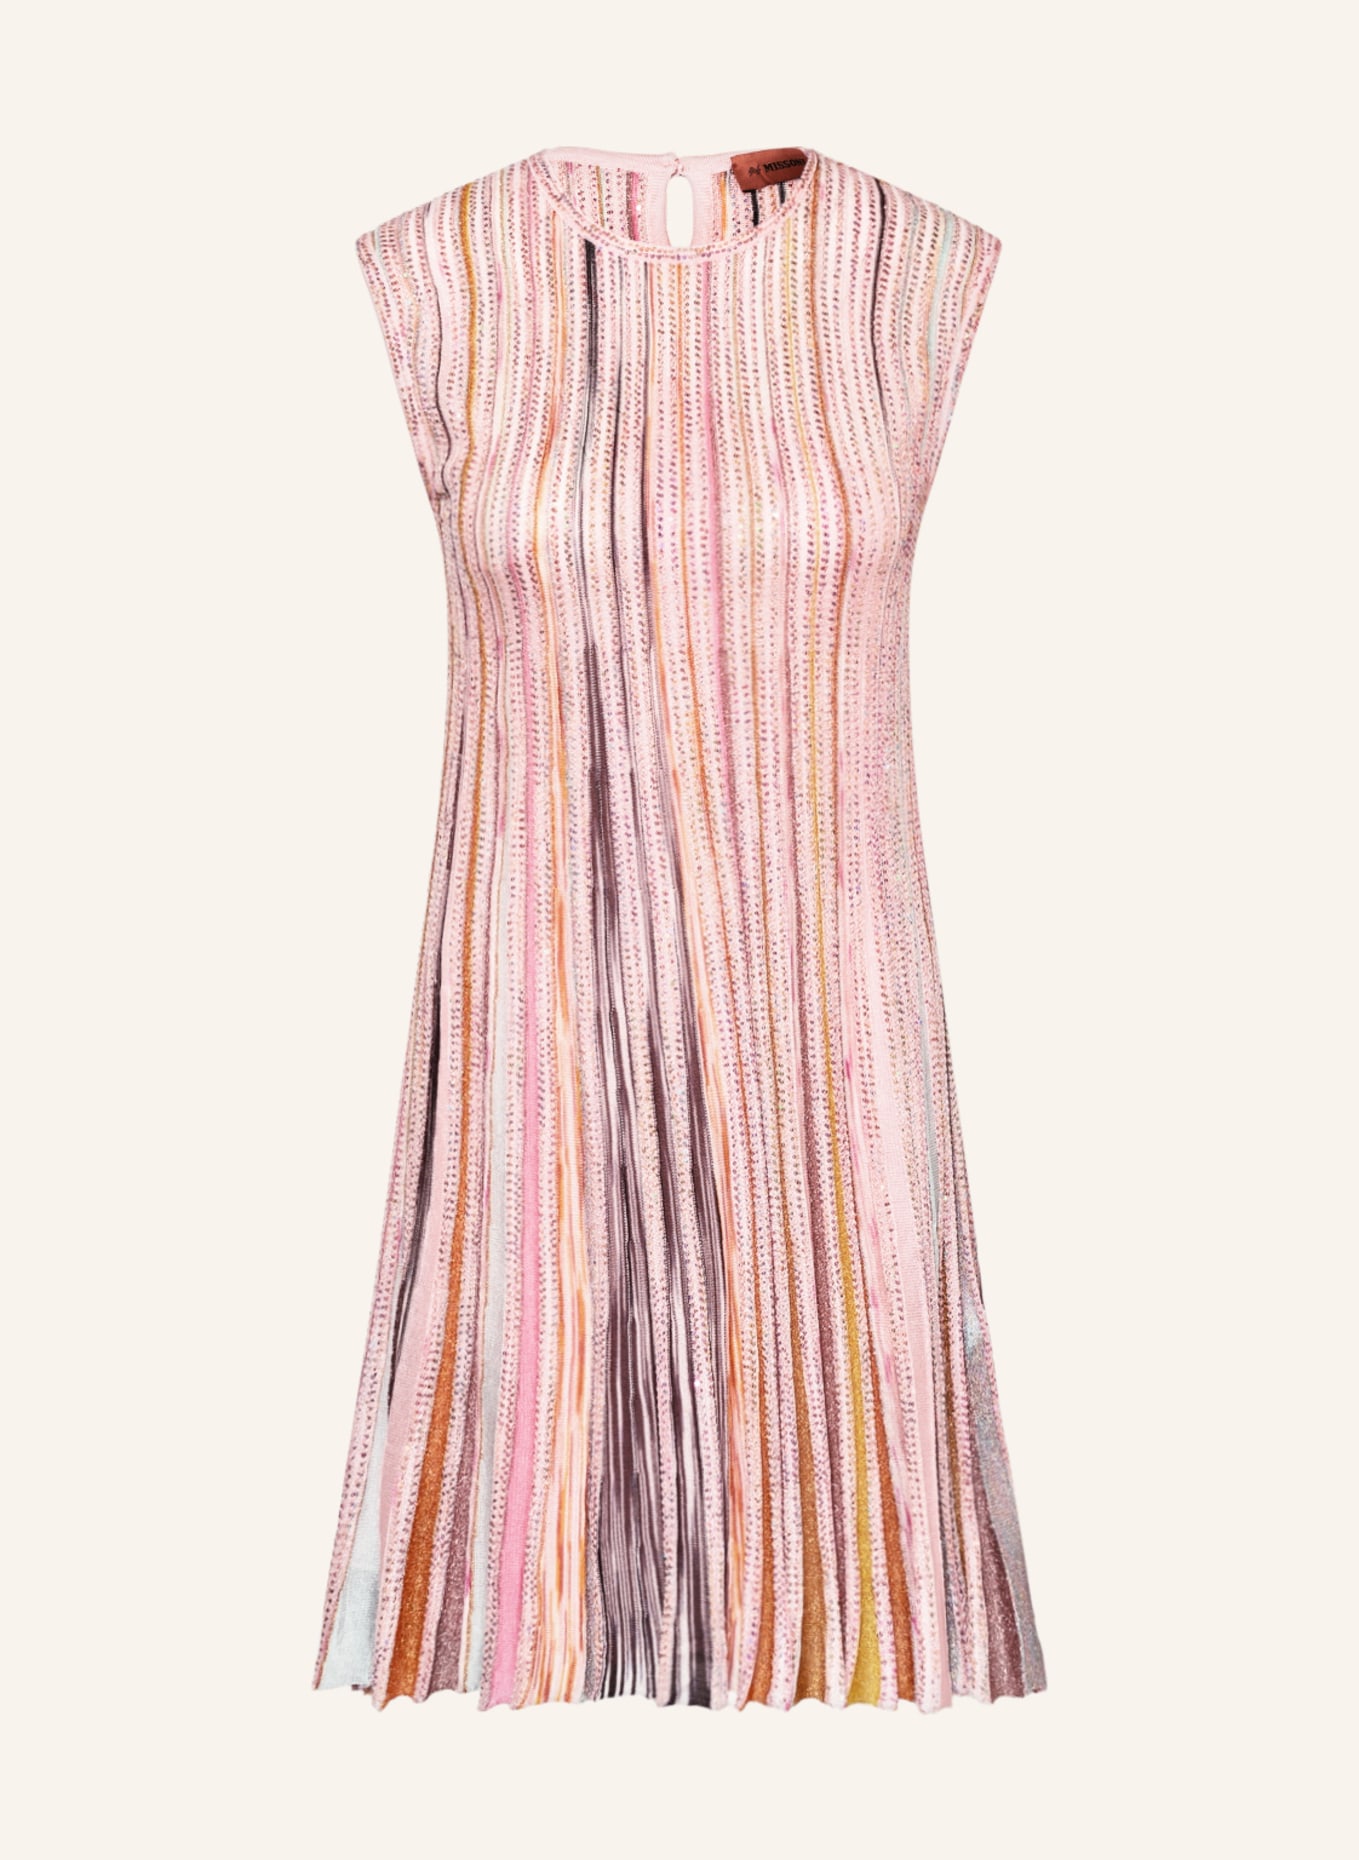 MISSONI Silk dress with glitter thread and sequins, Color: LIGHT PINK/ PINK/ DARK YELLOW (Image 1)